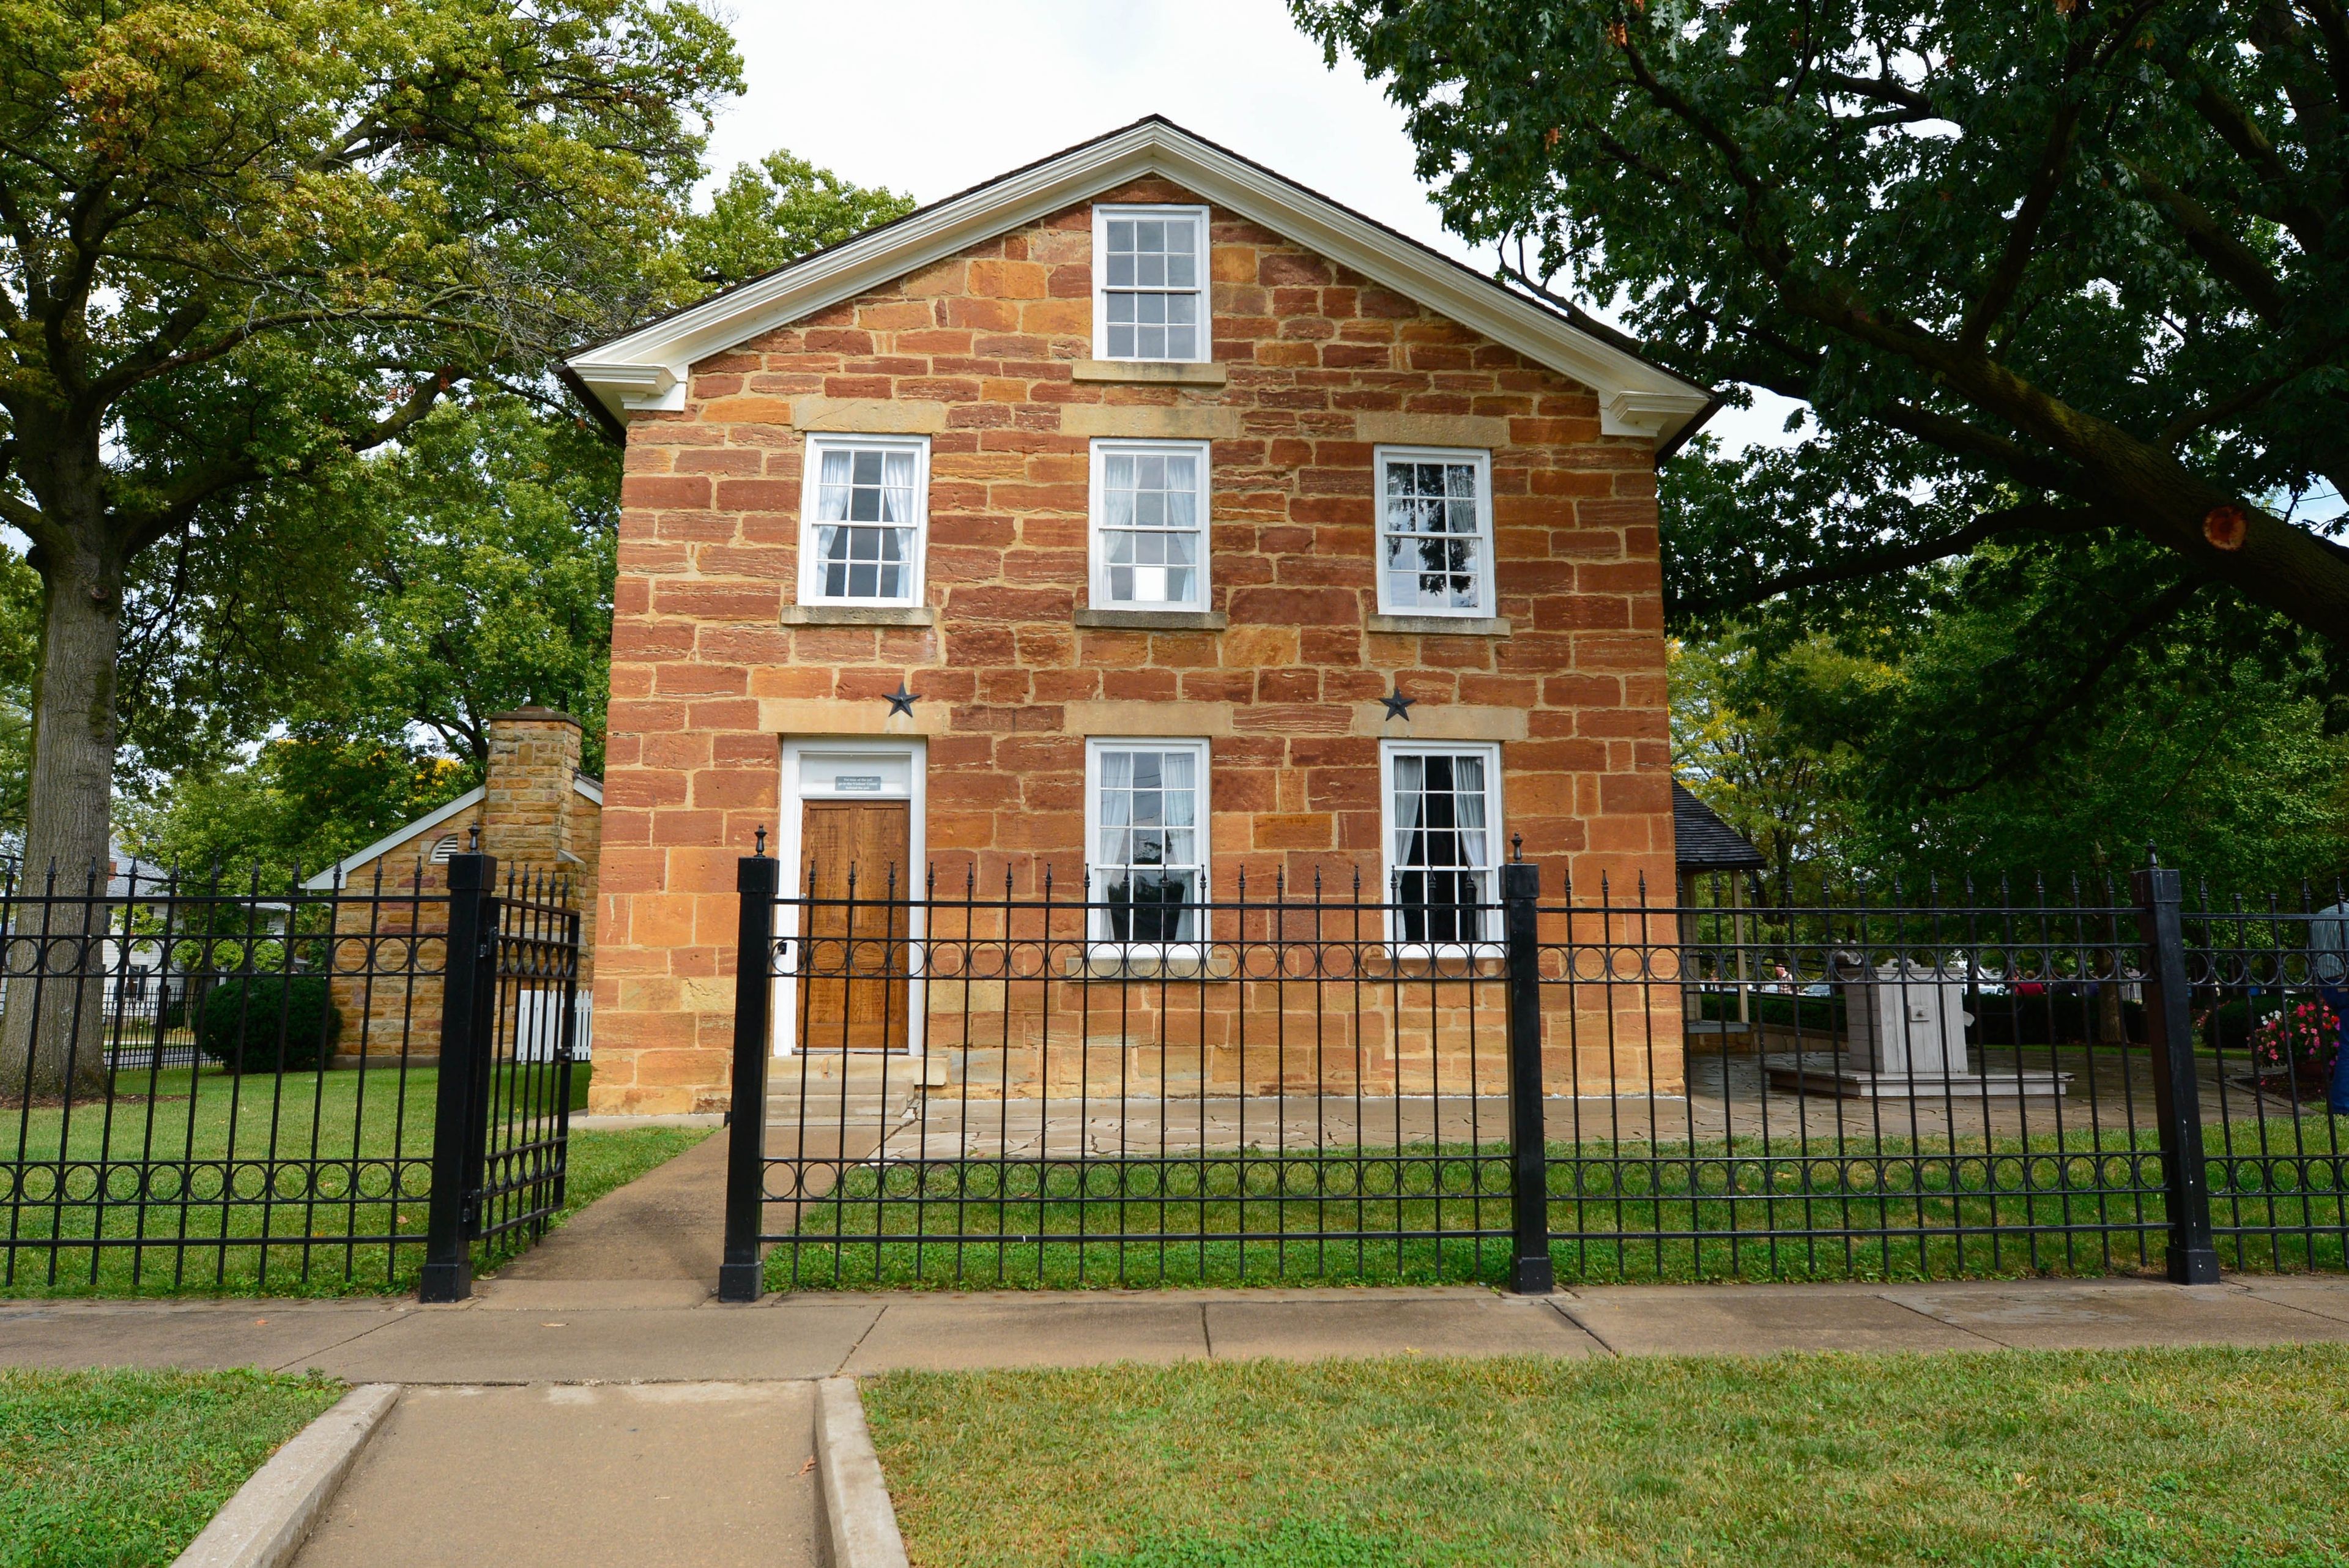 A photograph of Carthage Jail in Illinois.